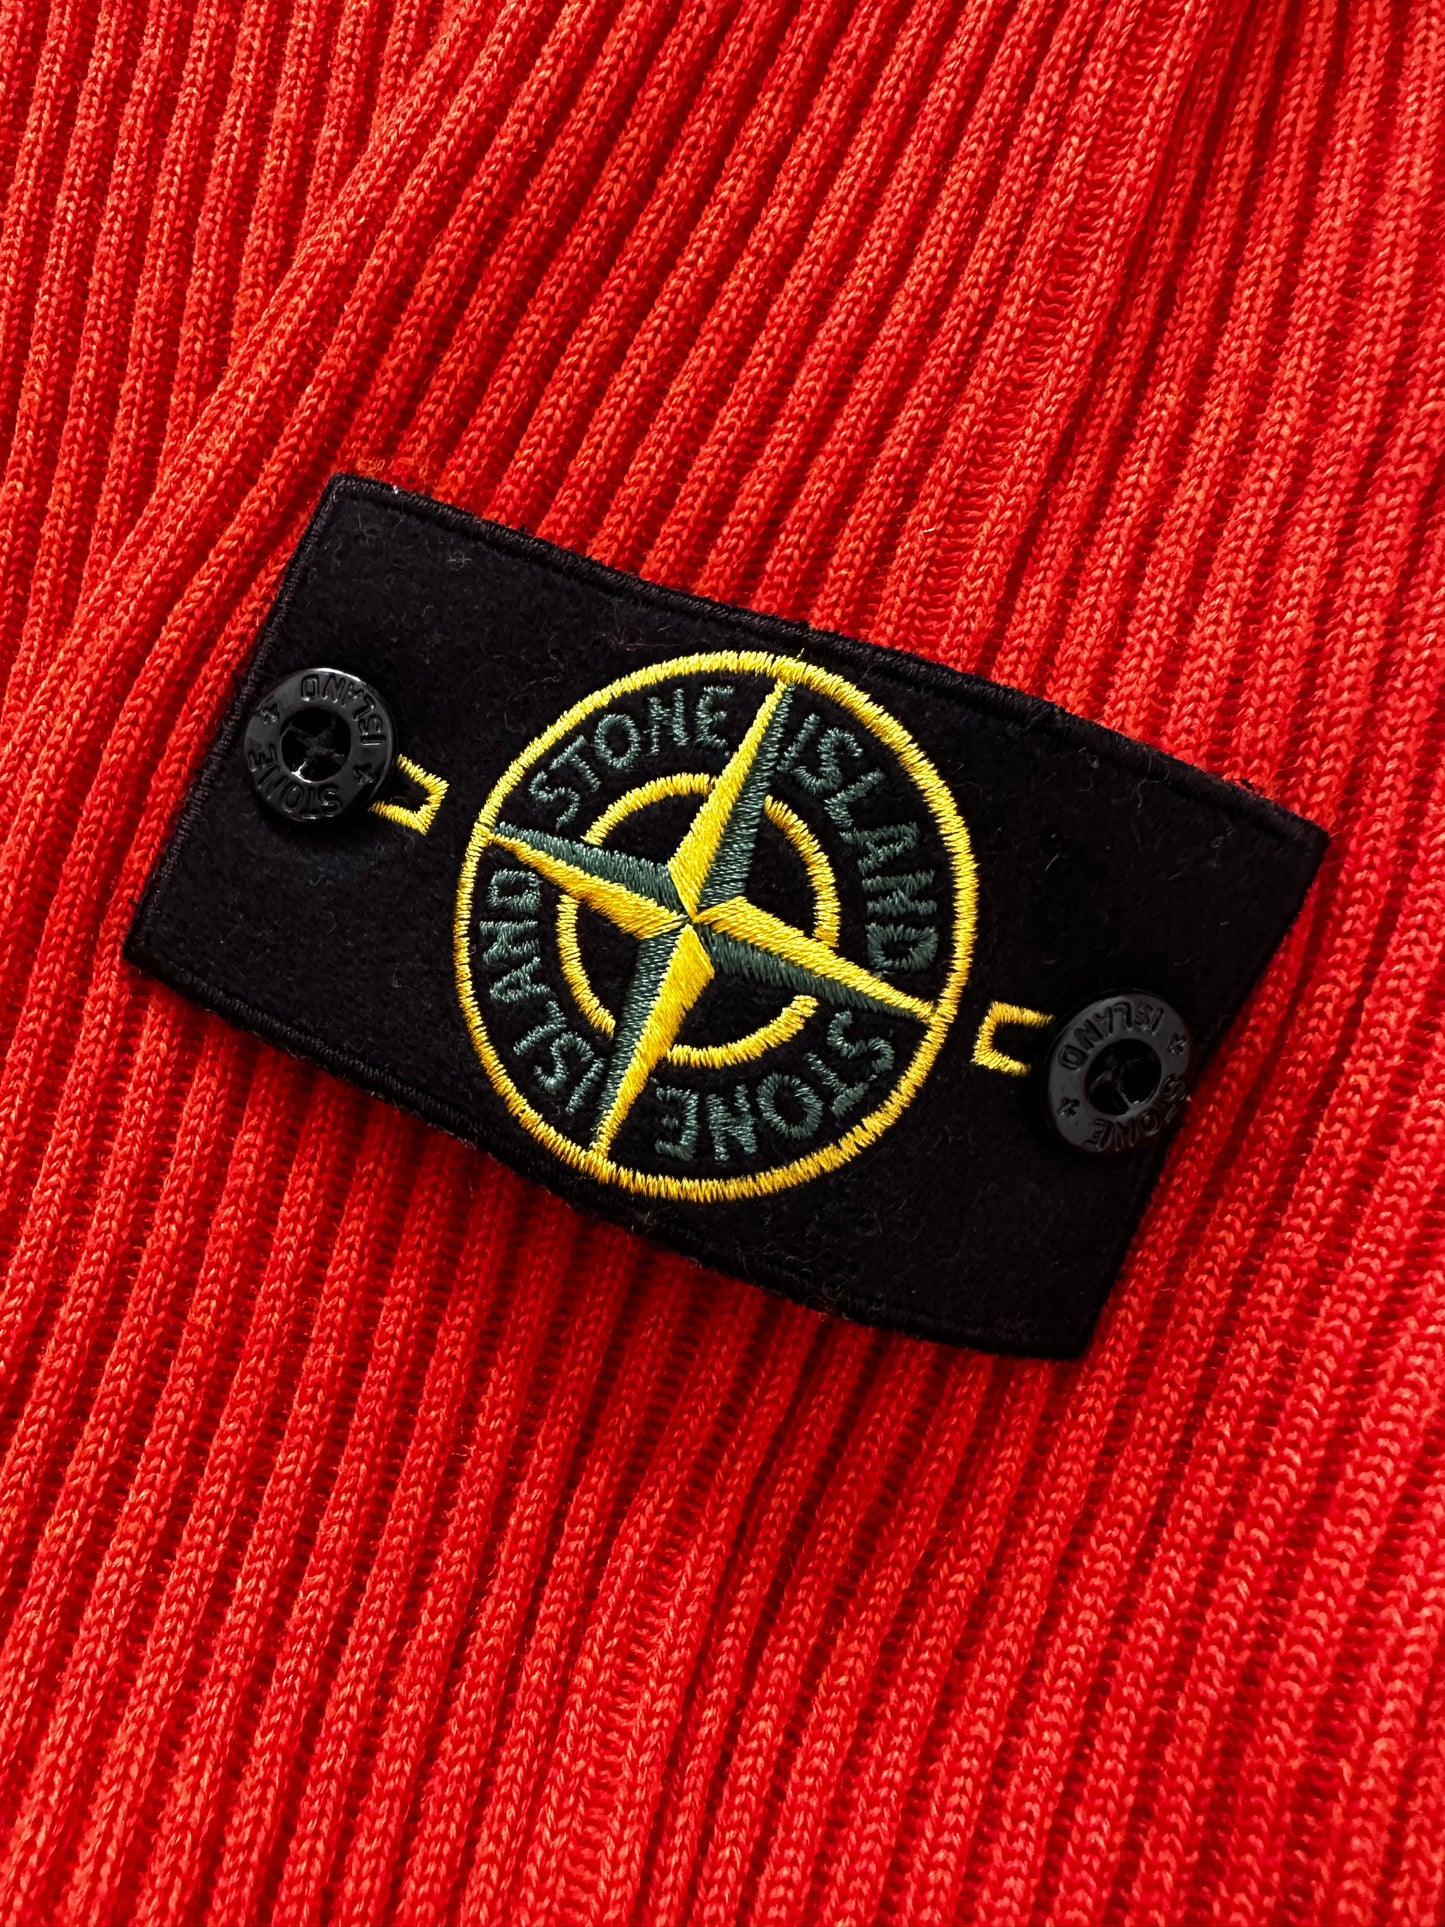 Stone Island 2015 Turtleneck Knit Sweater - L - Made in Italy